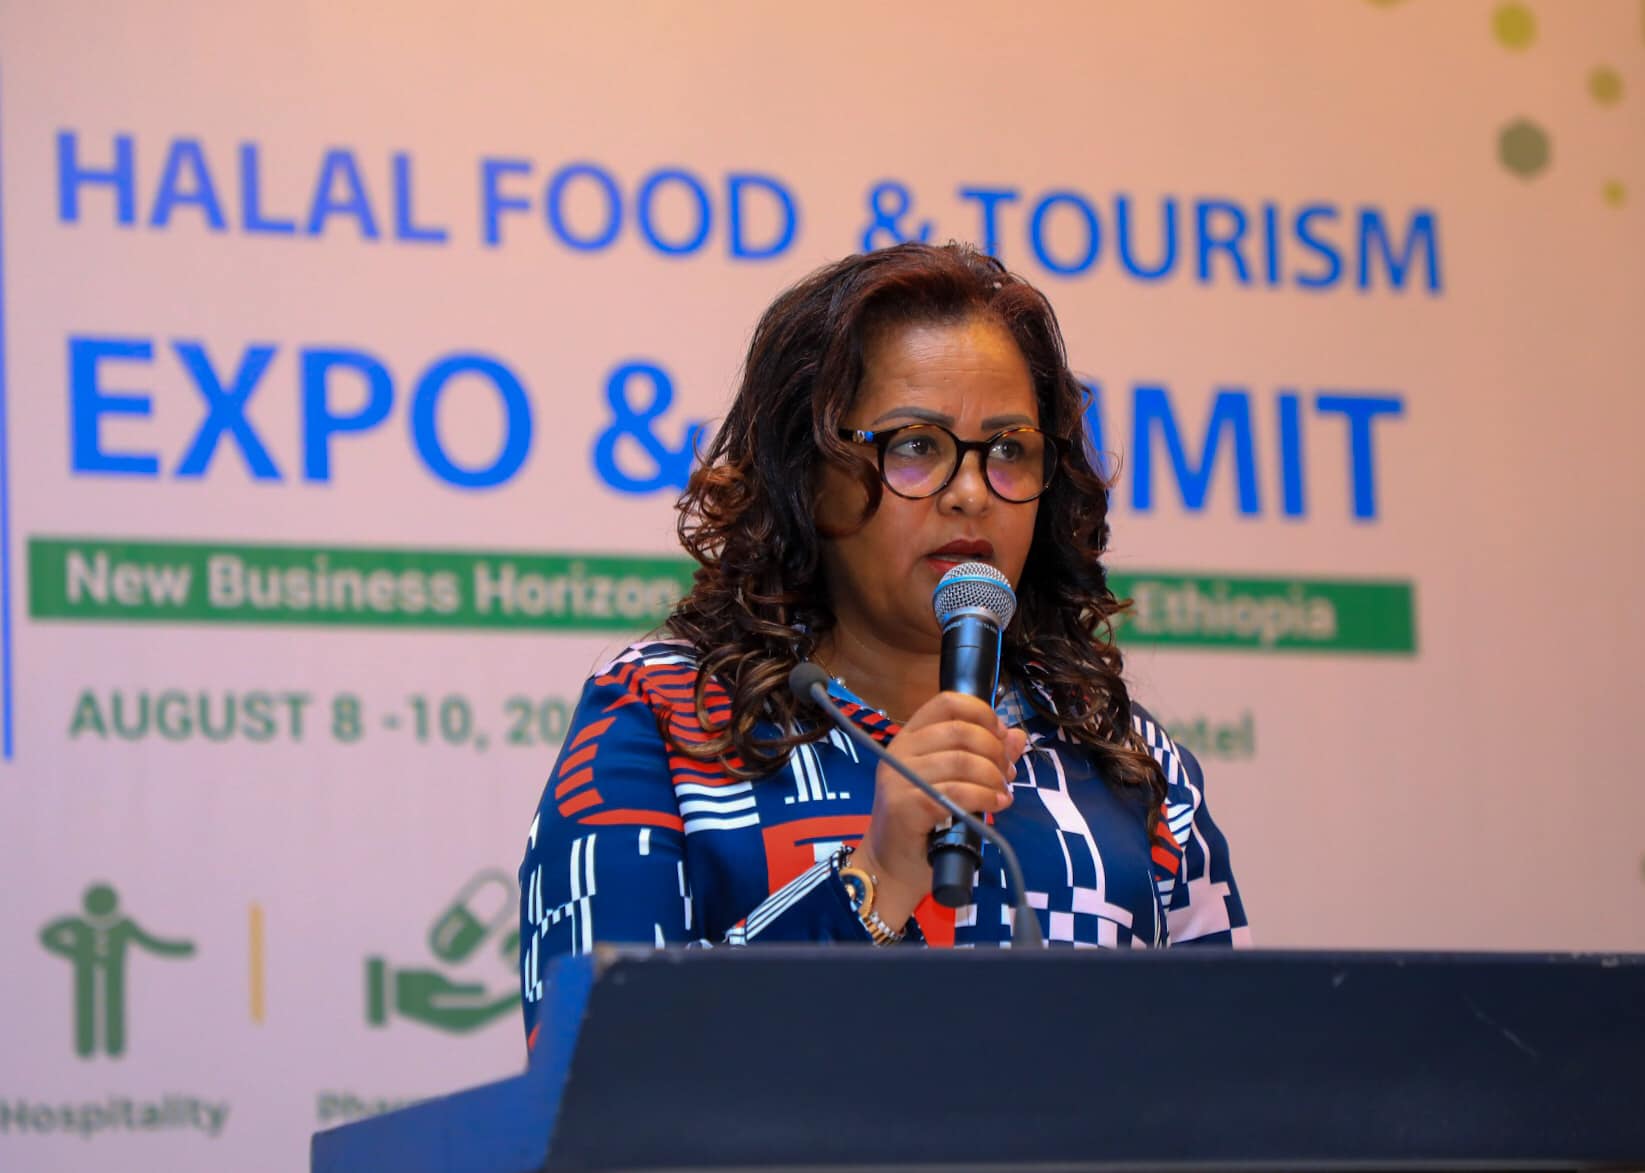 Halal Food and Tourism exhibition